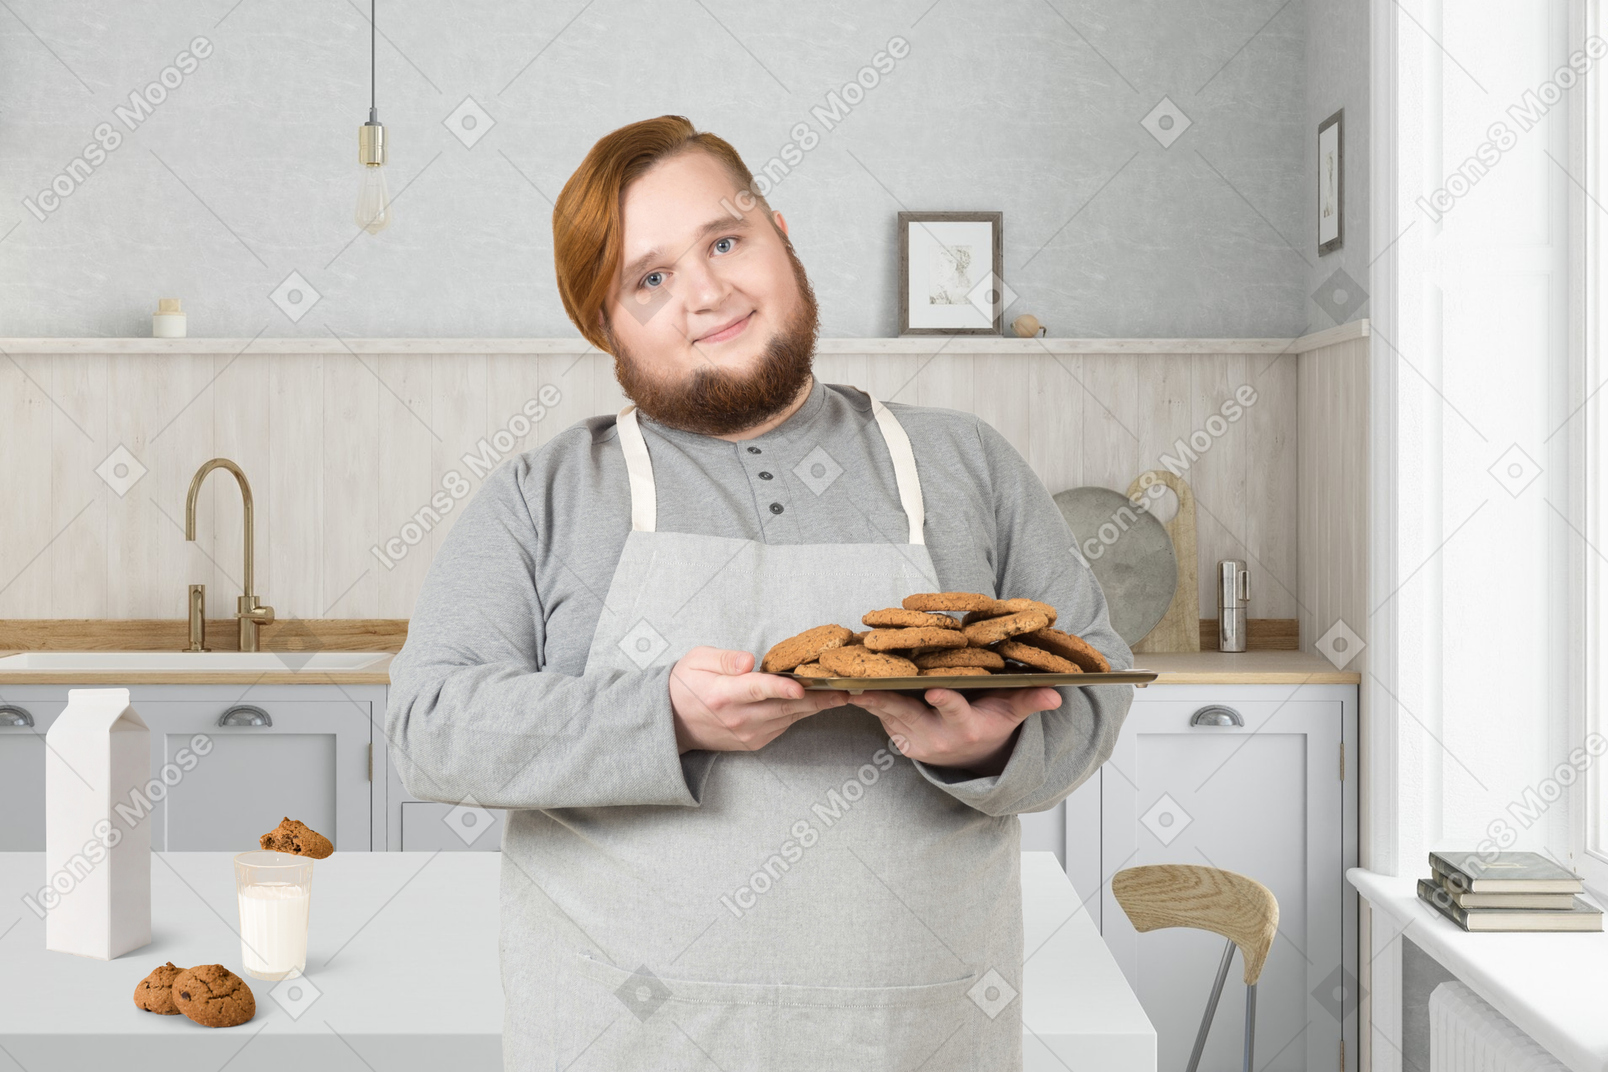 Man holding a plate with cookies